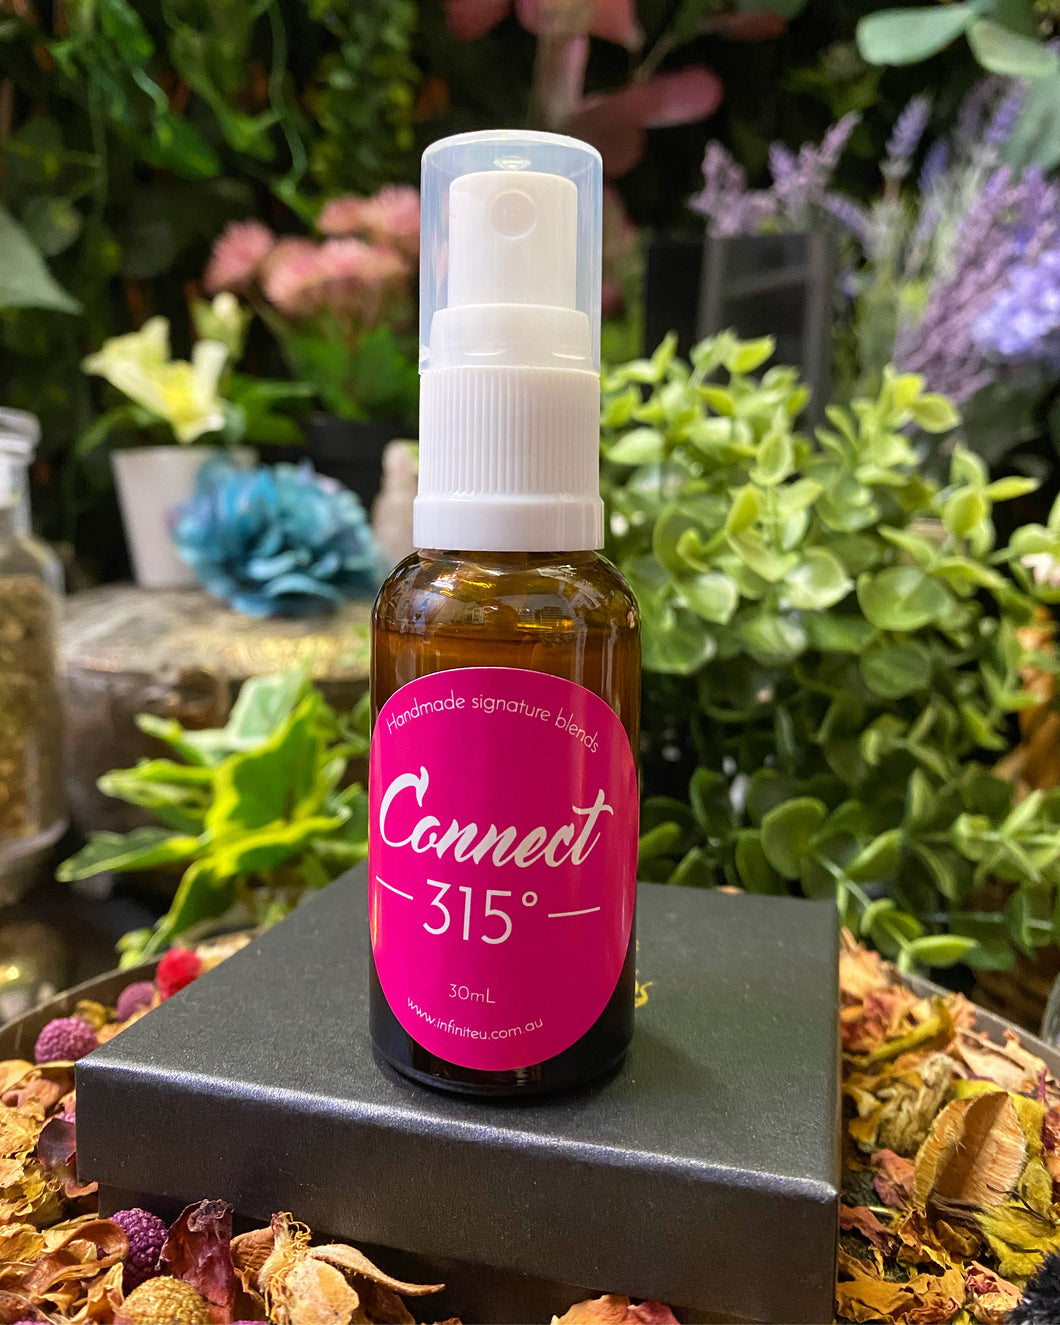 Connect - hand made essential oil spray